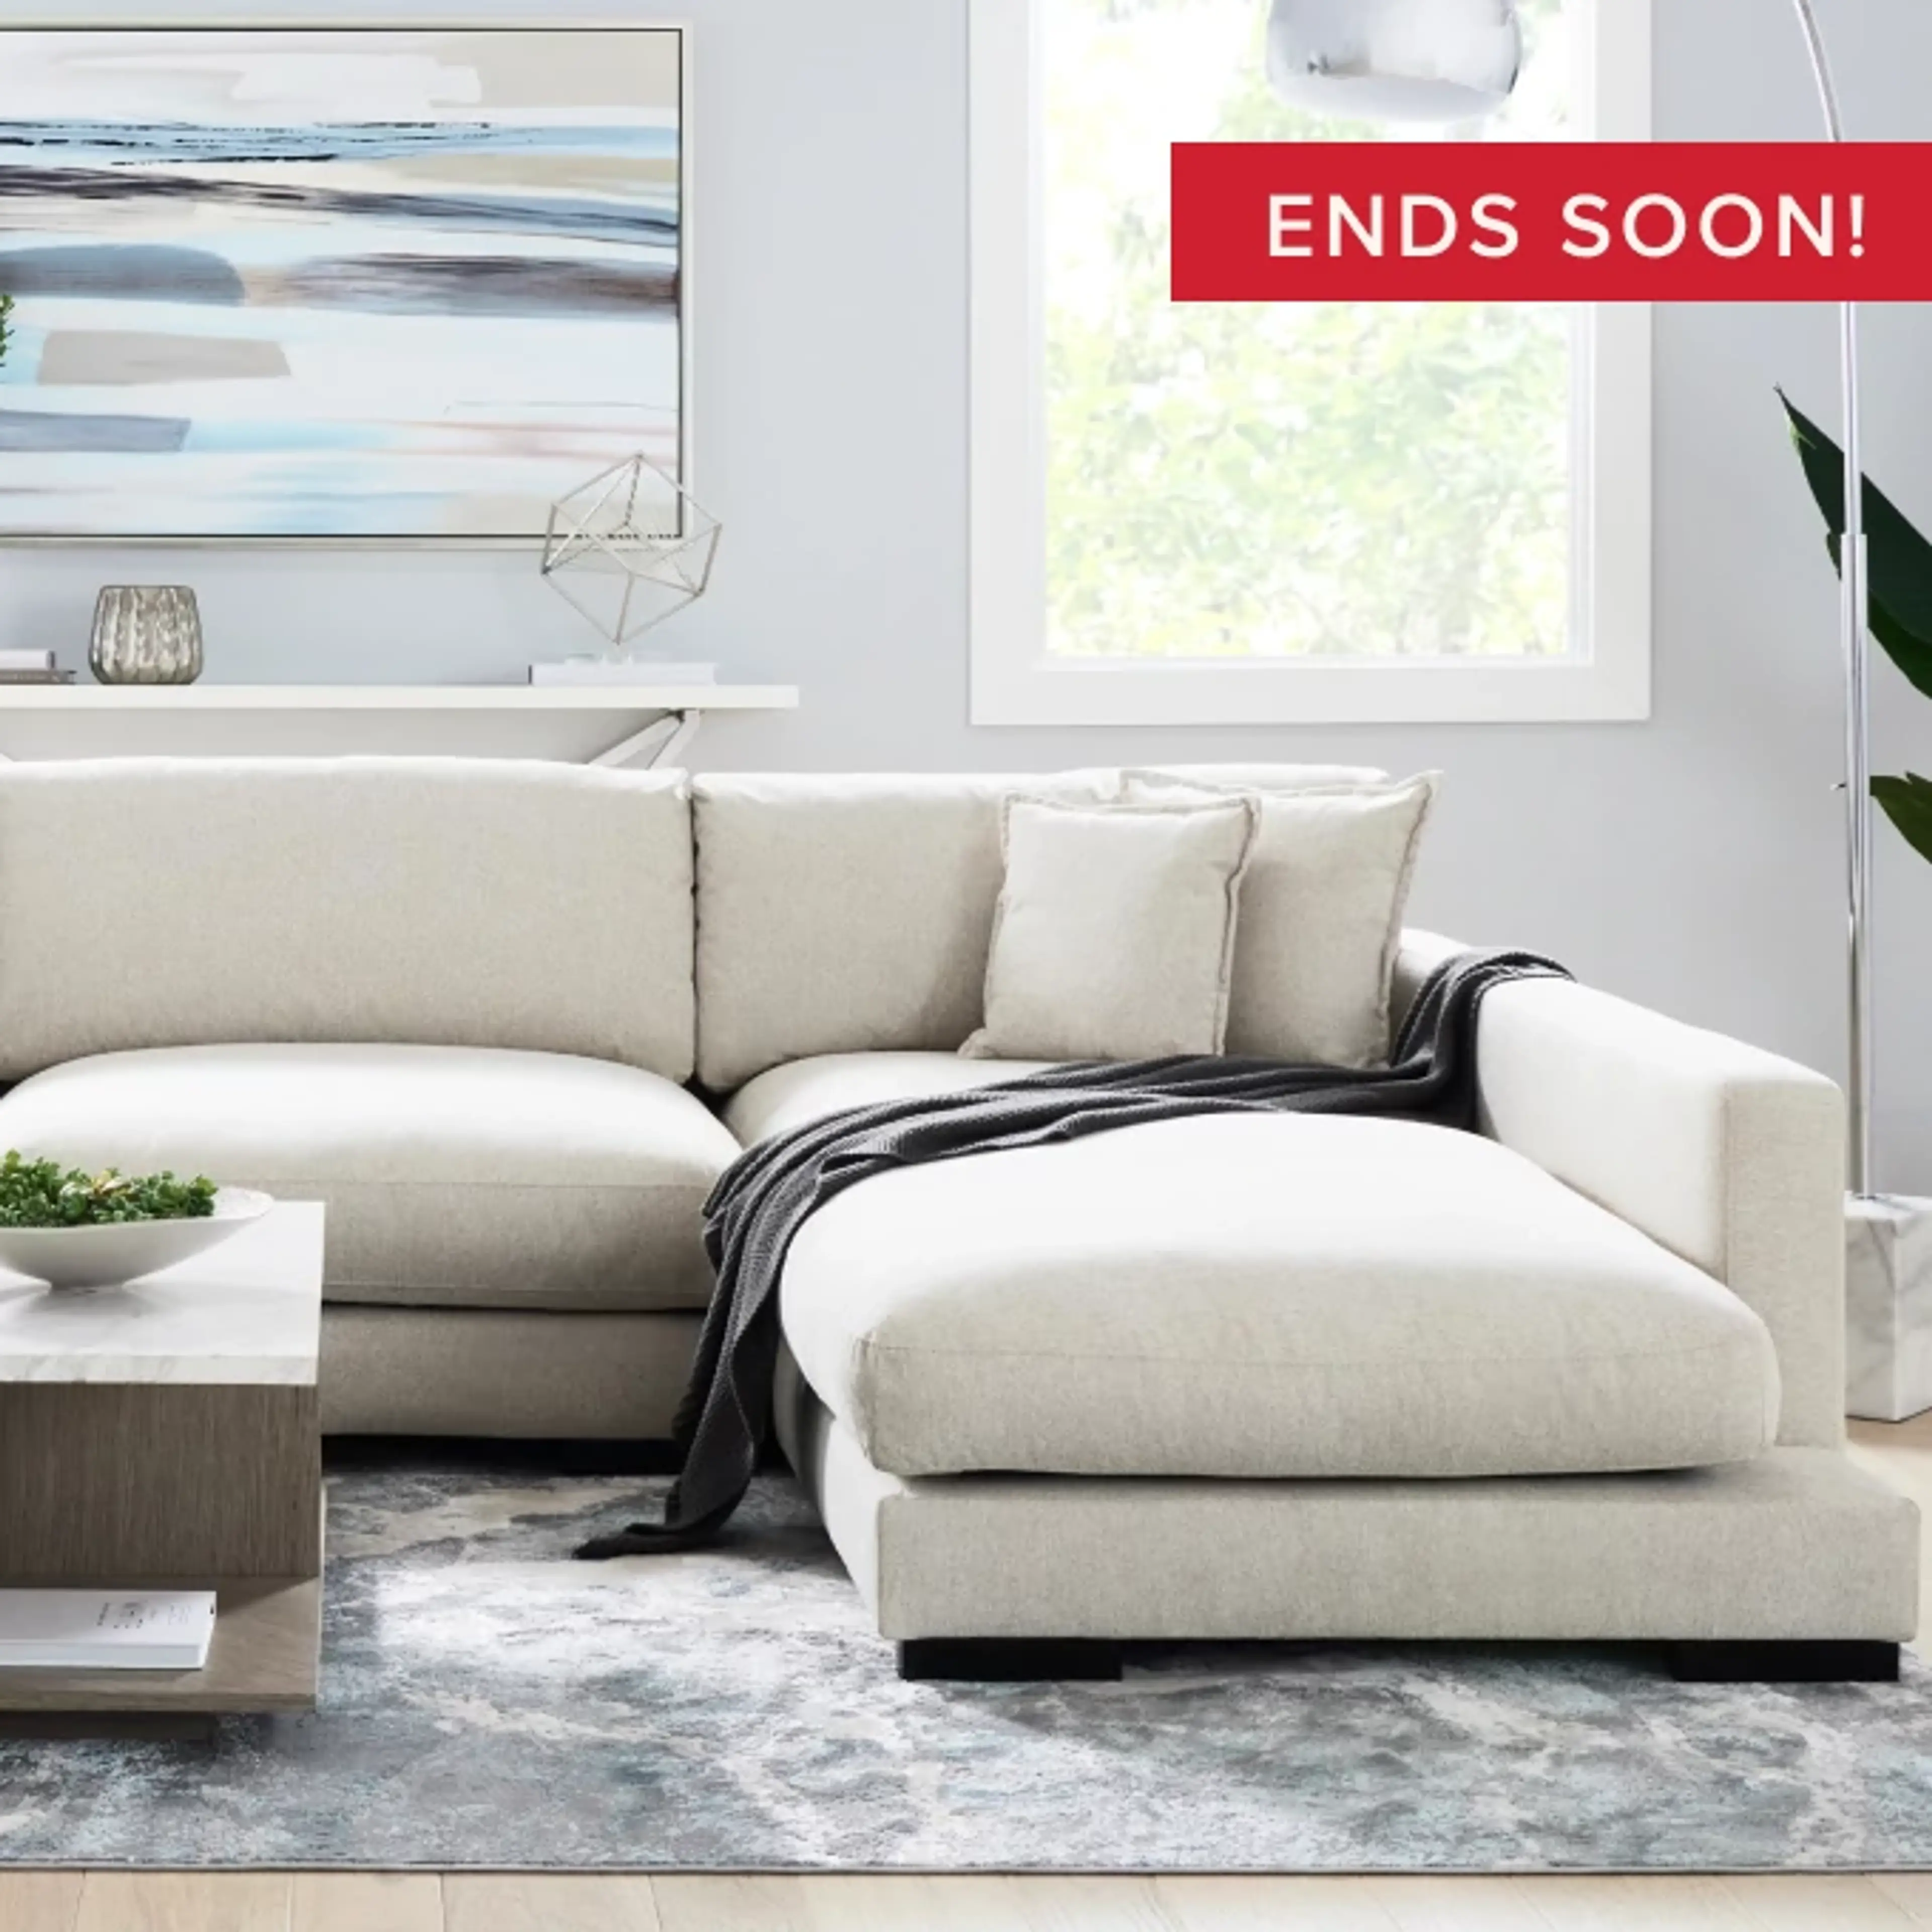 20% OFF SOFAS & SECTIONALS*